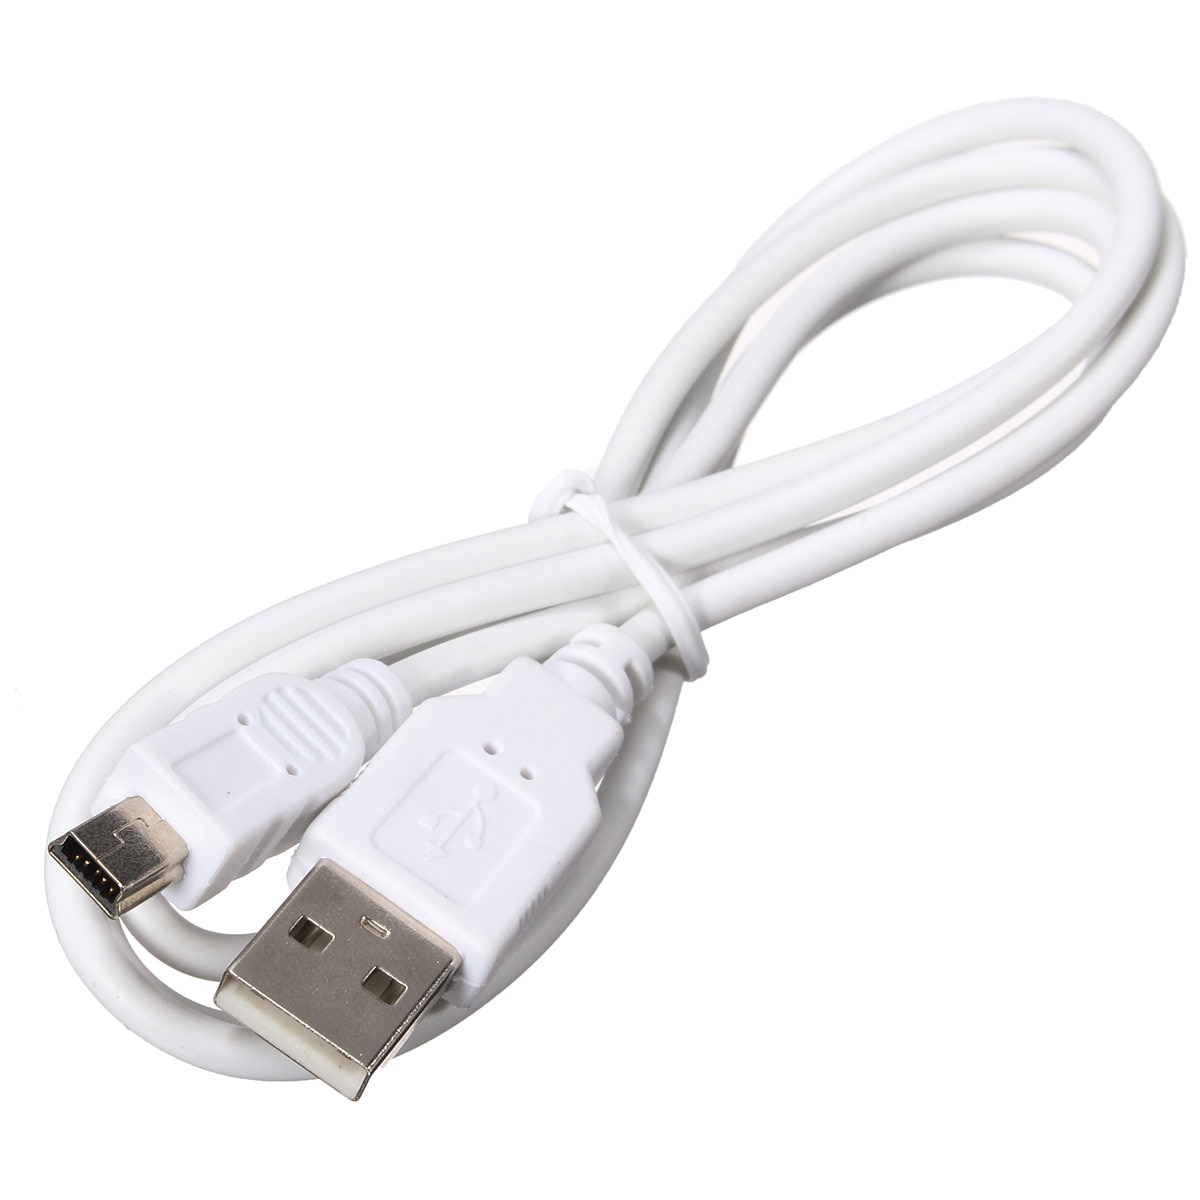 CLAITE 1 m MiNi USB naar USB 2.0 Data Sync Charge Kabel voor MP3 MP4 MP5 GPS Camera Mobiele telefoon Kabel Wit